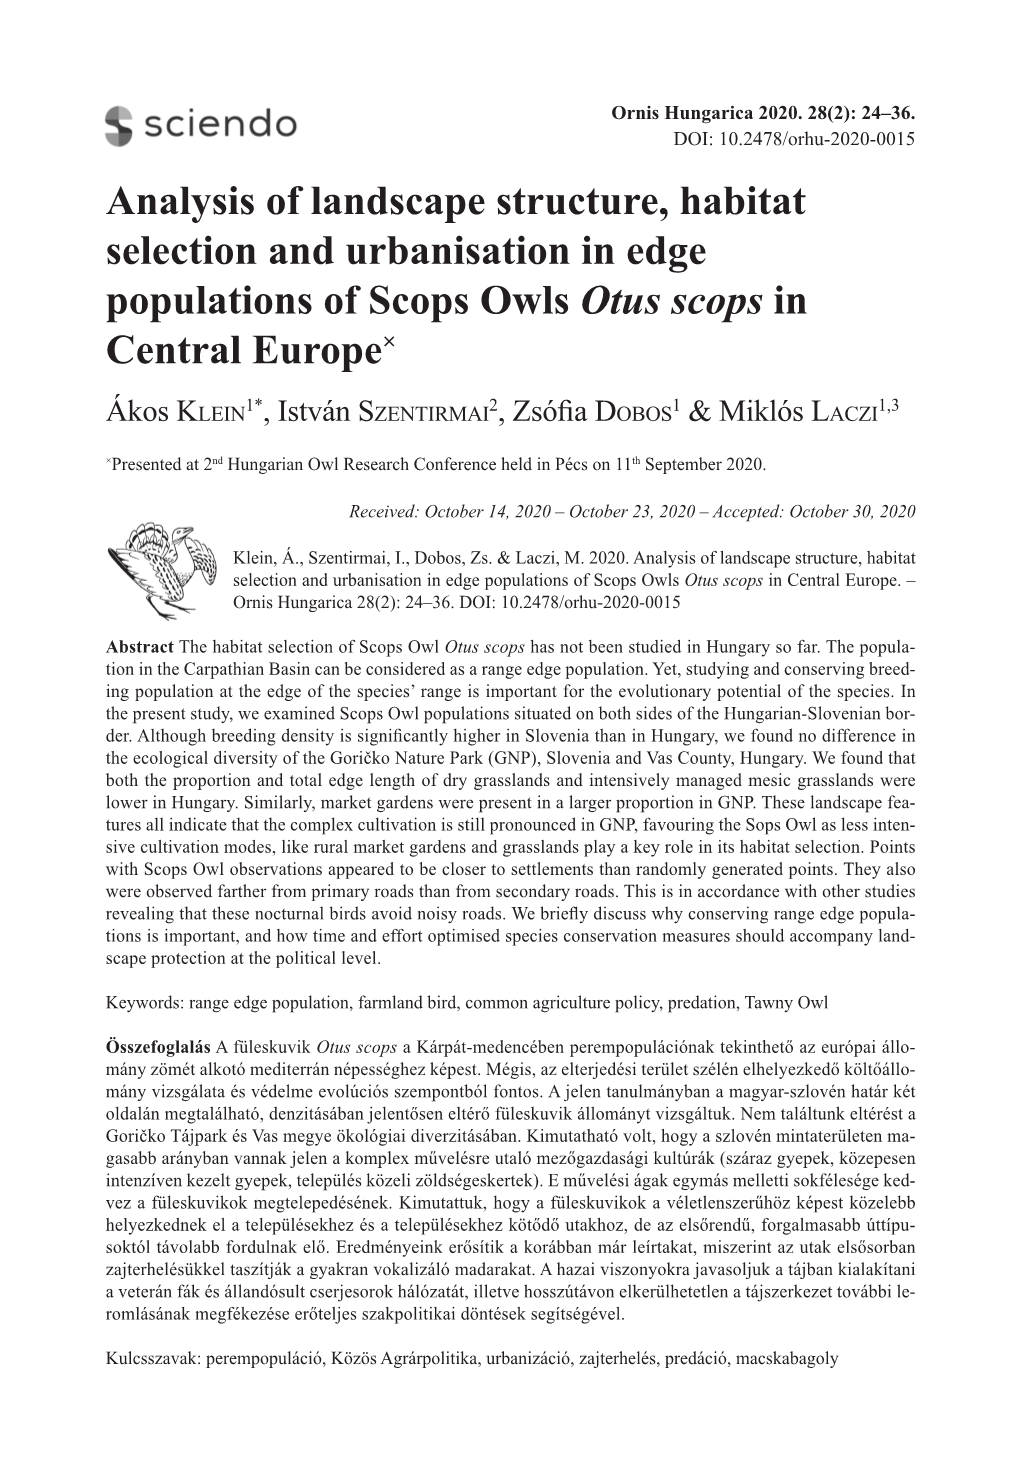 Analysis of Landscape Structure, Habitat Selection and Urbanisation in Edge Populations of Scops Owls Otus Scops in Central Europe×